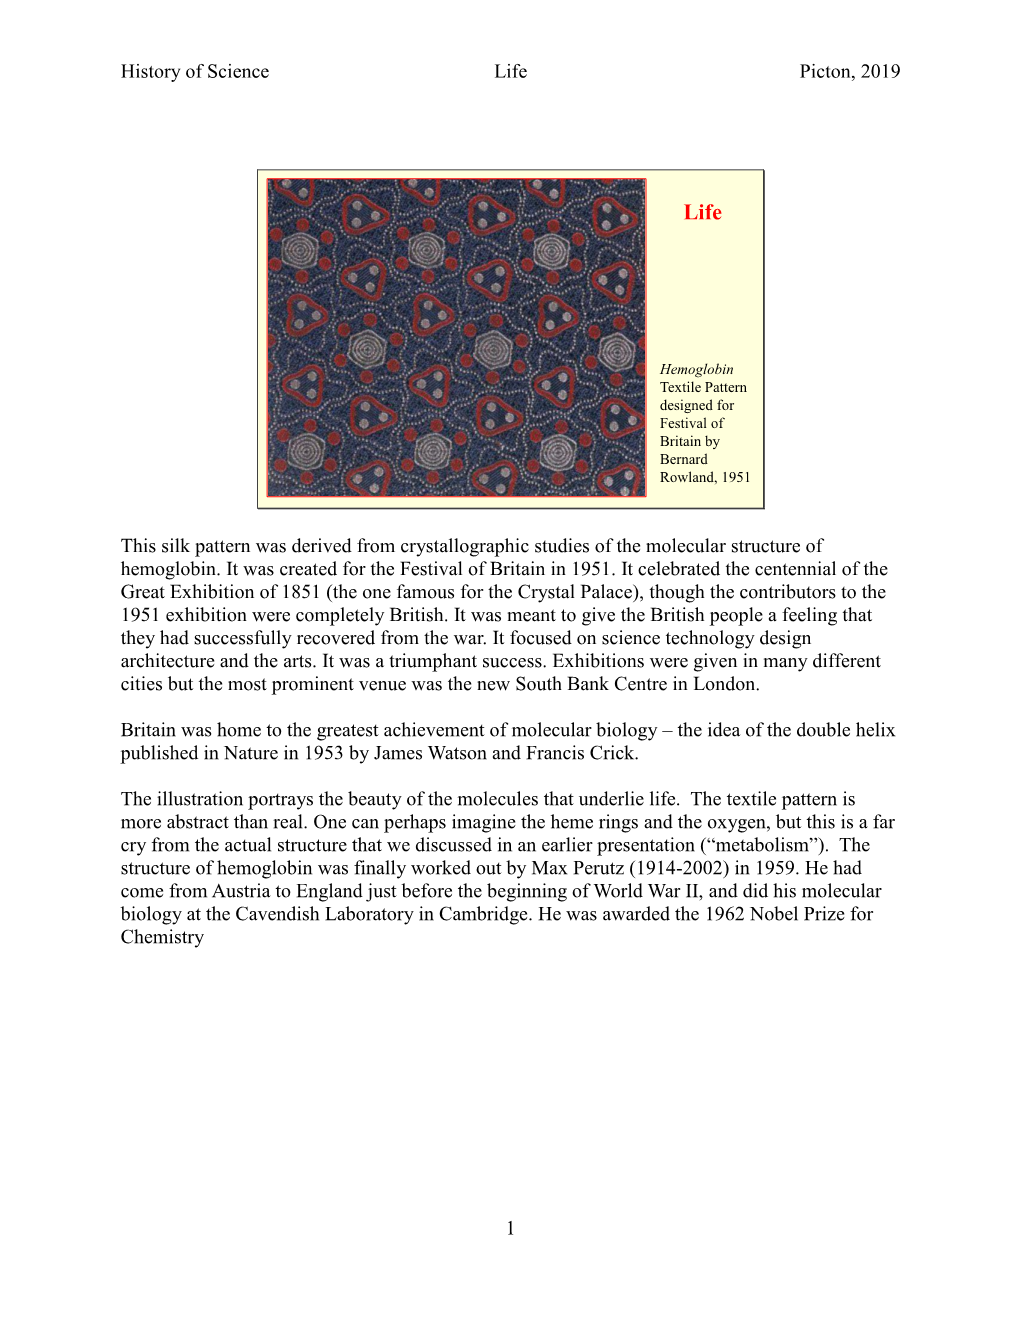 History of Science Life Picton, 2019 1 This Silk Pattern Was Derived from Crystallographic Studies of the Molecular Structure O